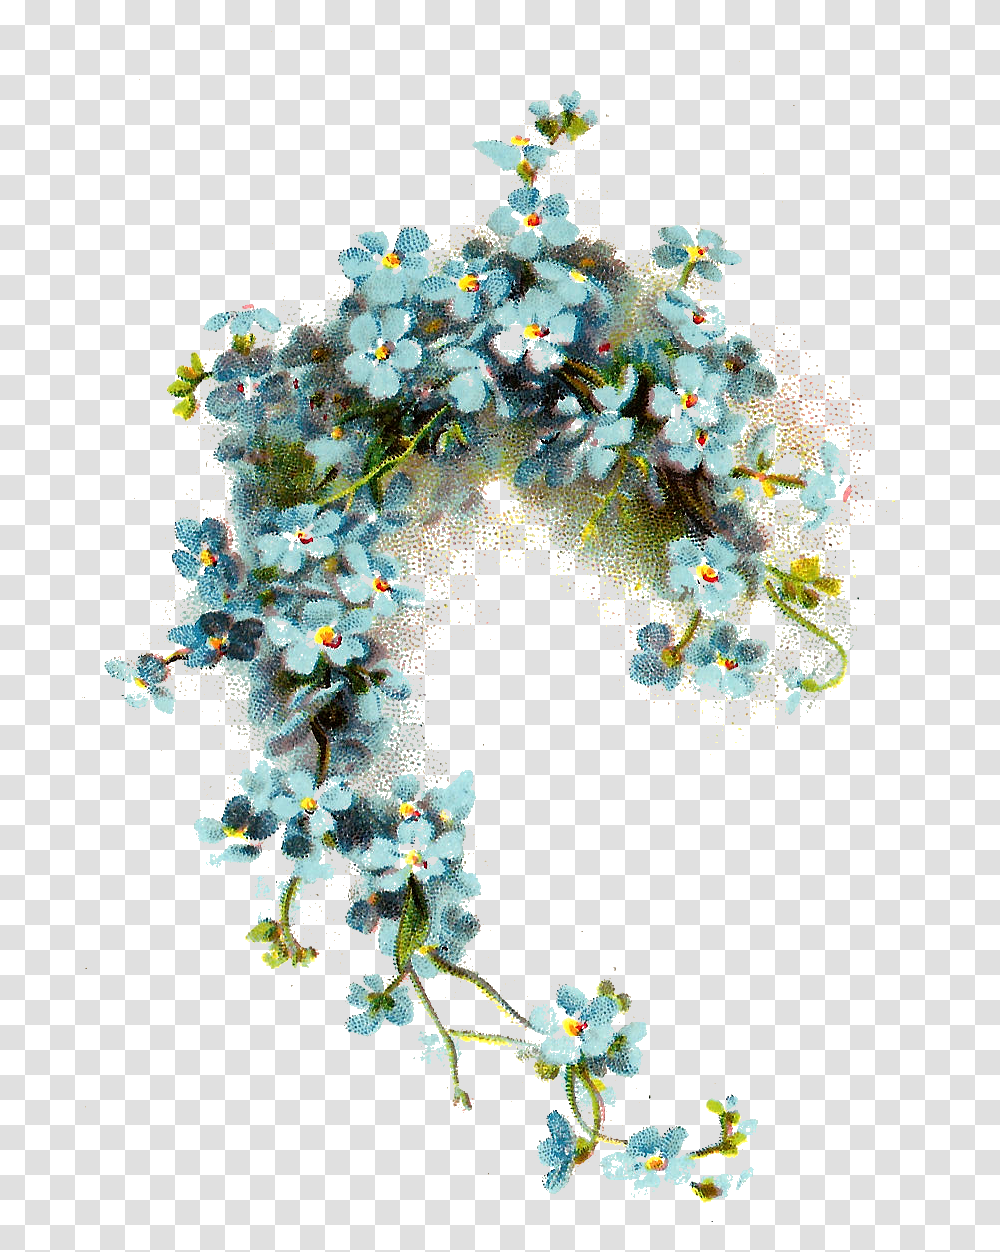 Crafts Images I Like Forget Me Not, Christmas Tree, Ornament, Plant, Wreath Transparent Png